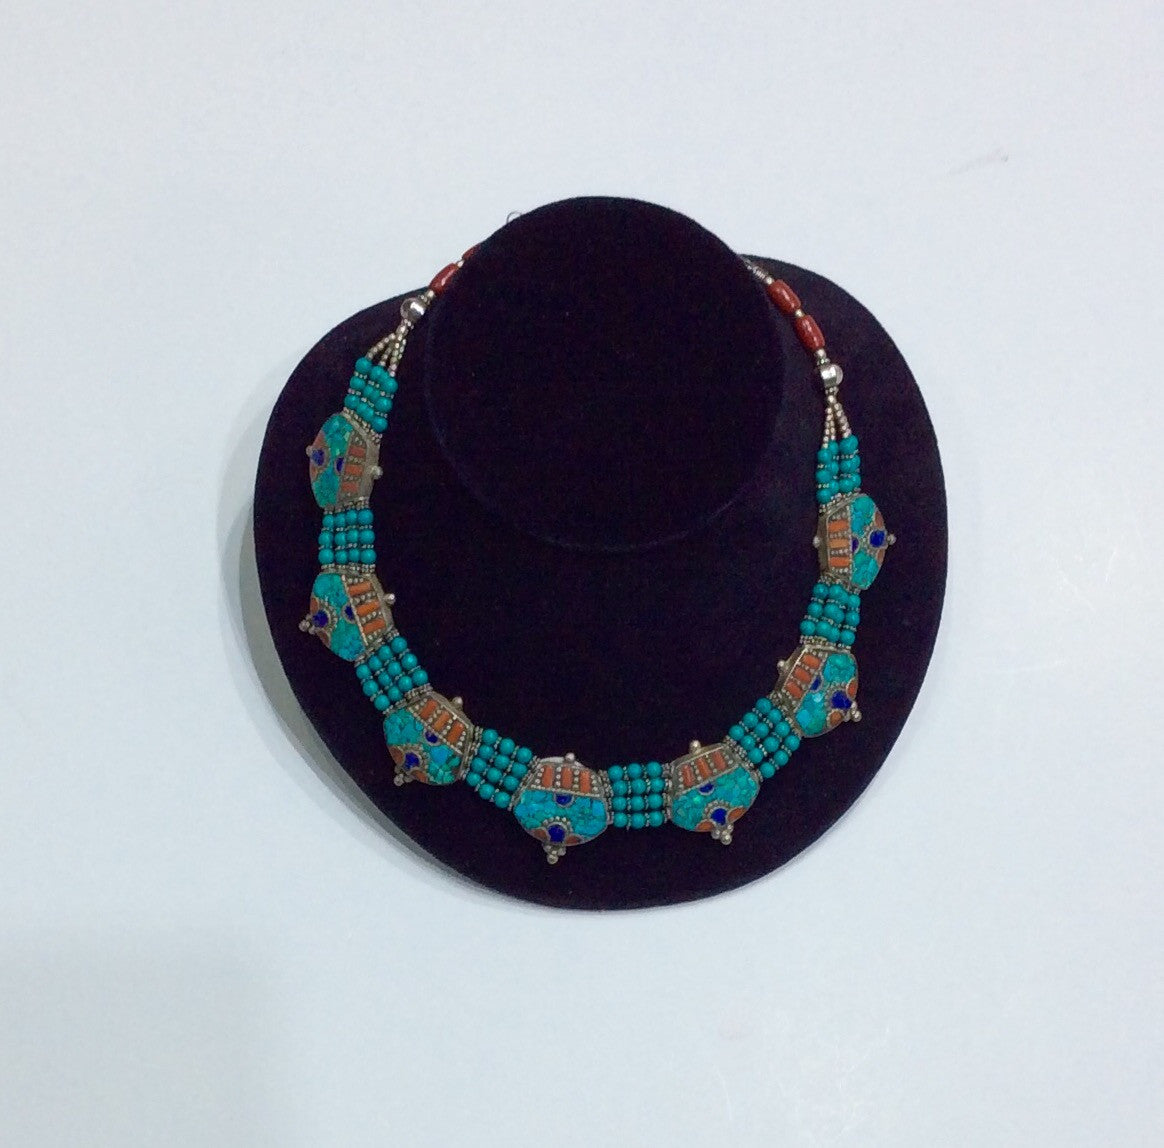 Necklace-Coral, Lapis, Silver and Turquoise